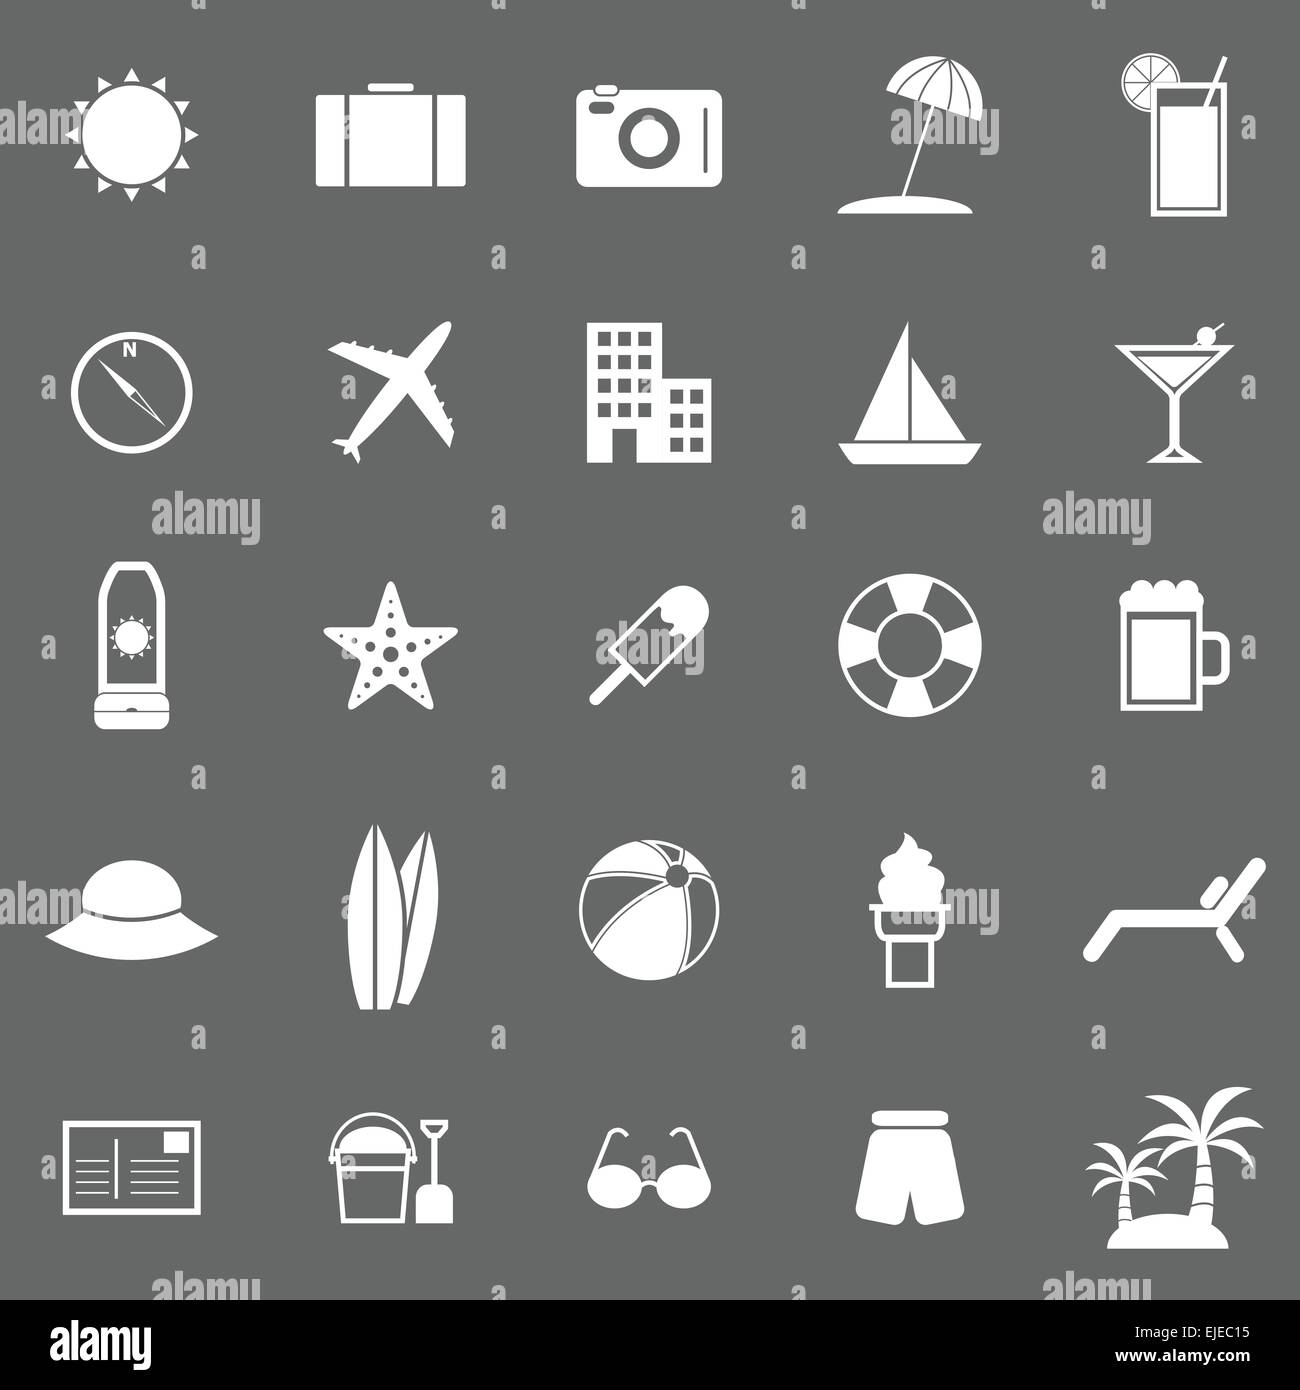 Summer icons on gray background, stock vector Stock Vector